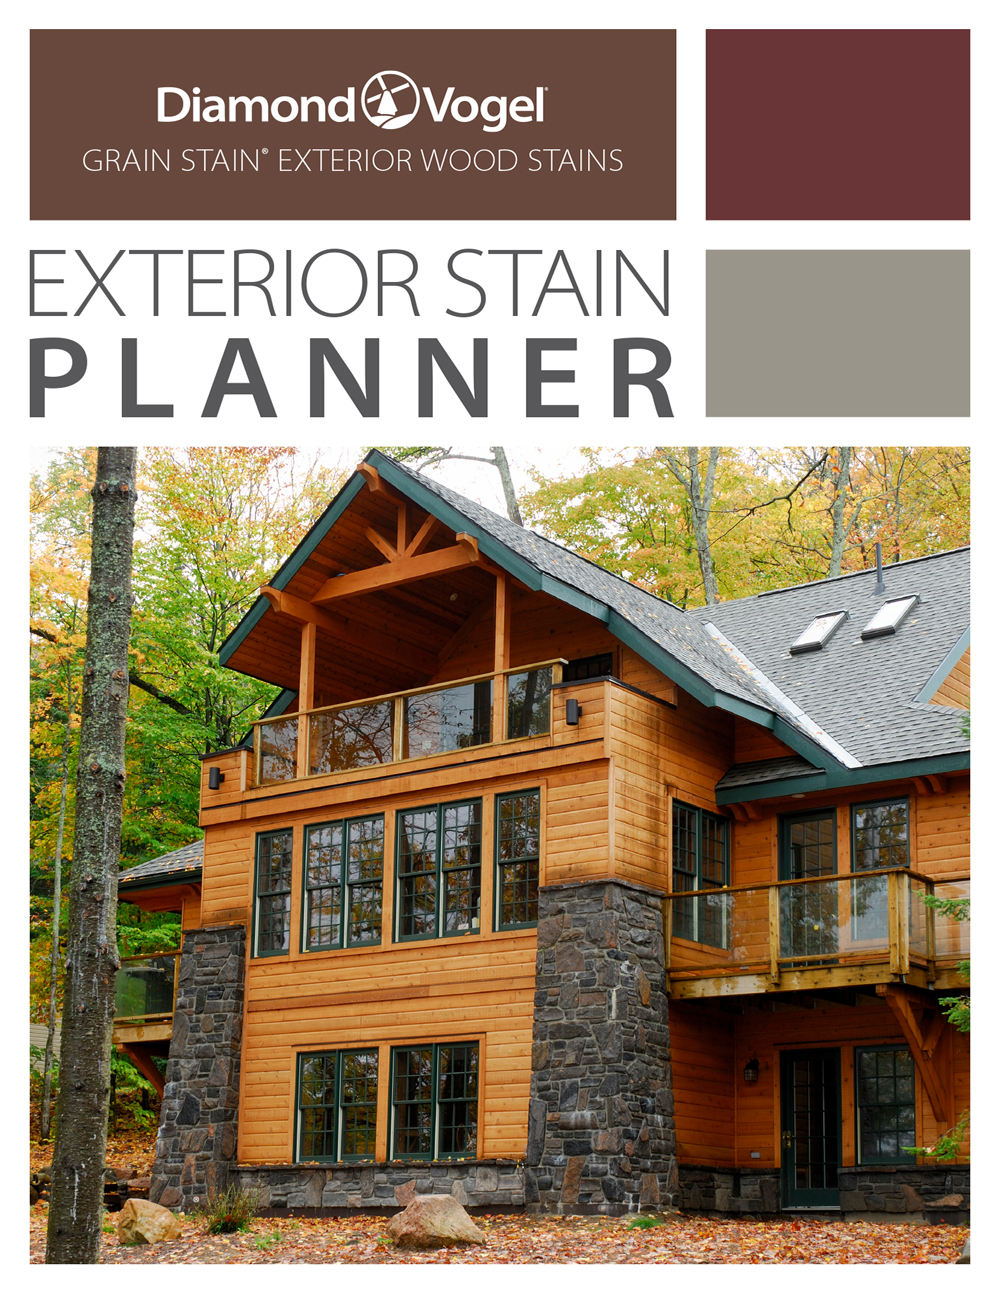 Exterior Stain Planner - Page 01